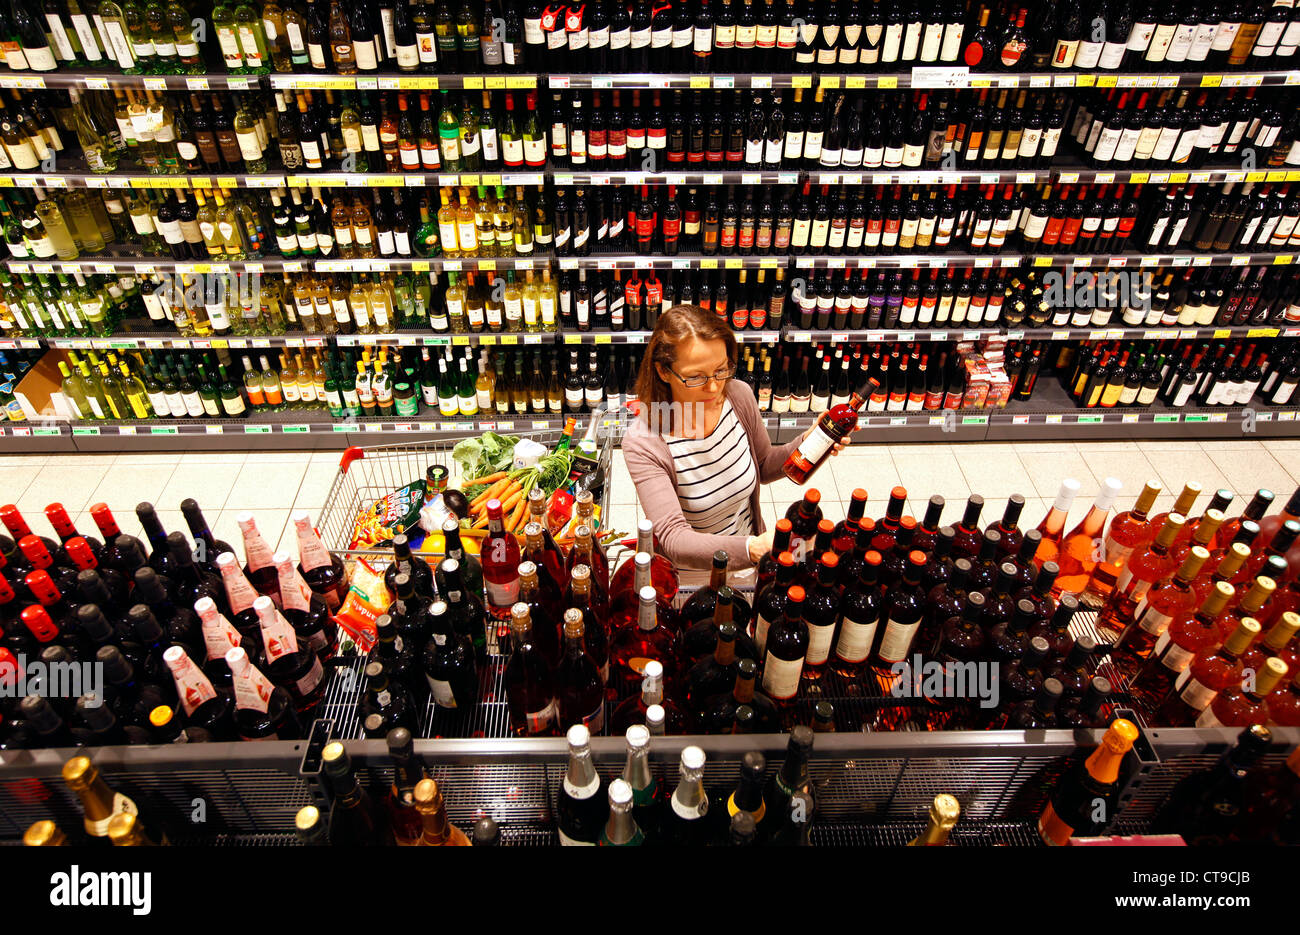 Woman is shopping in a large supermarket. Beverage department, alcoholic beverages, spirits, wine, champagne. Stock Photo